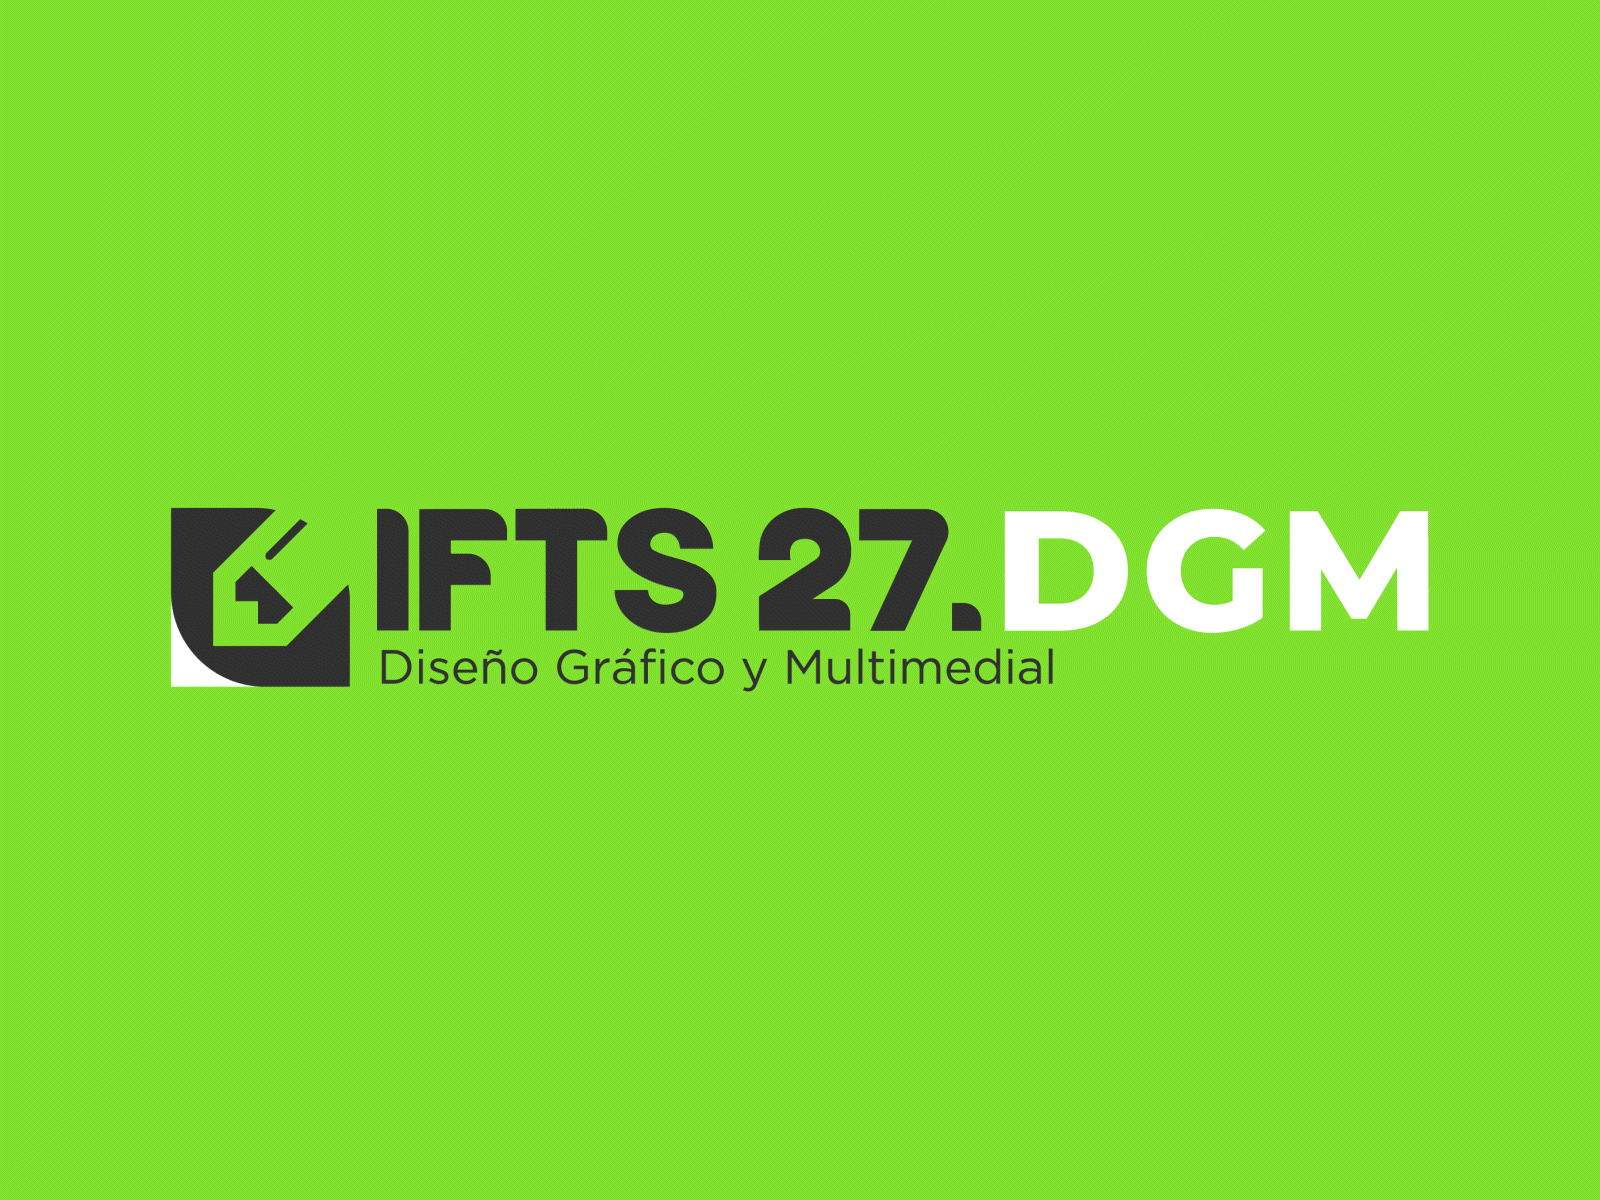 IFTS 27 Brand Campaign